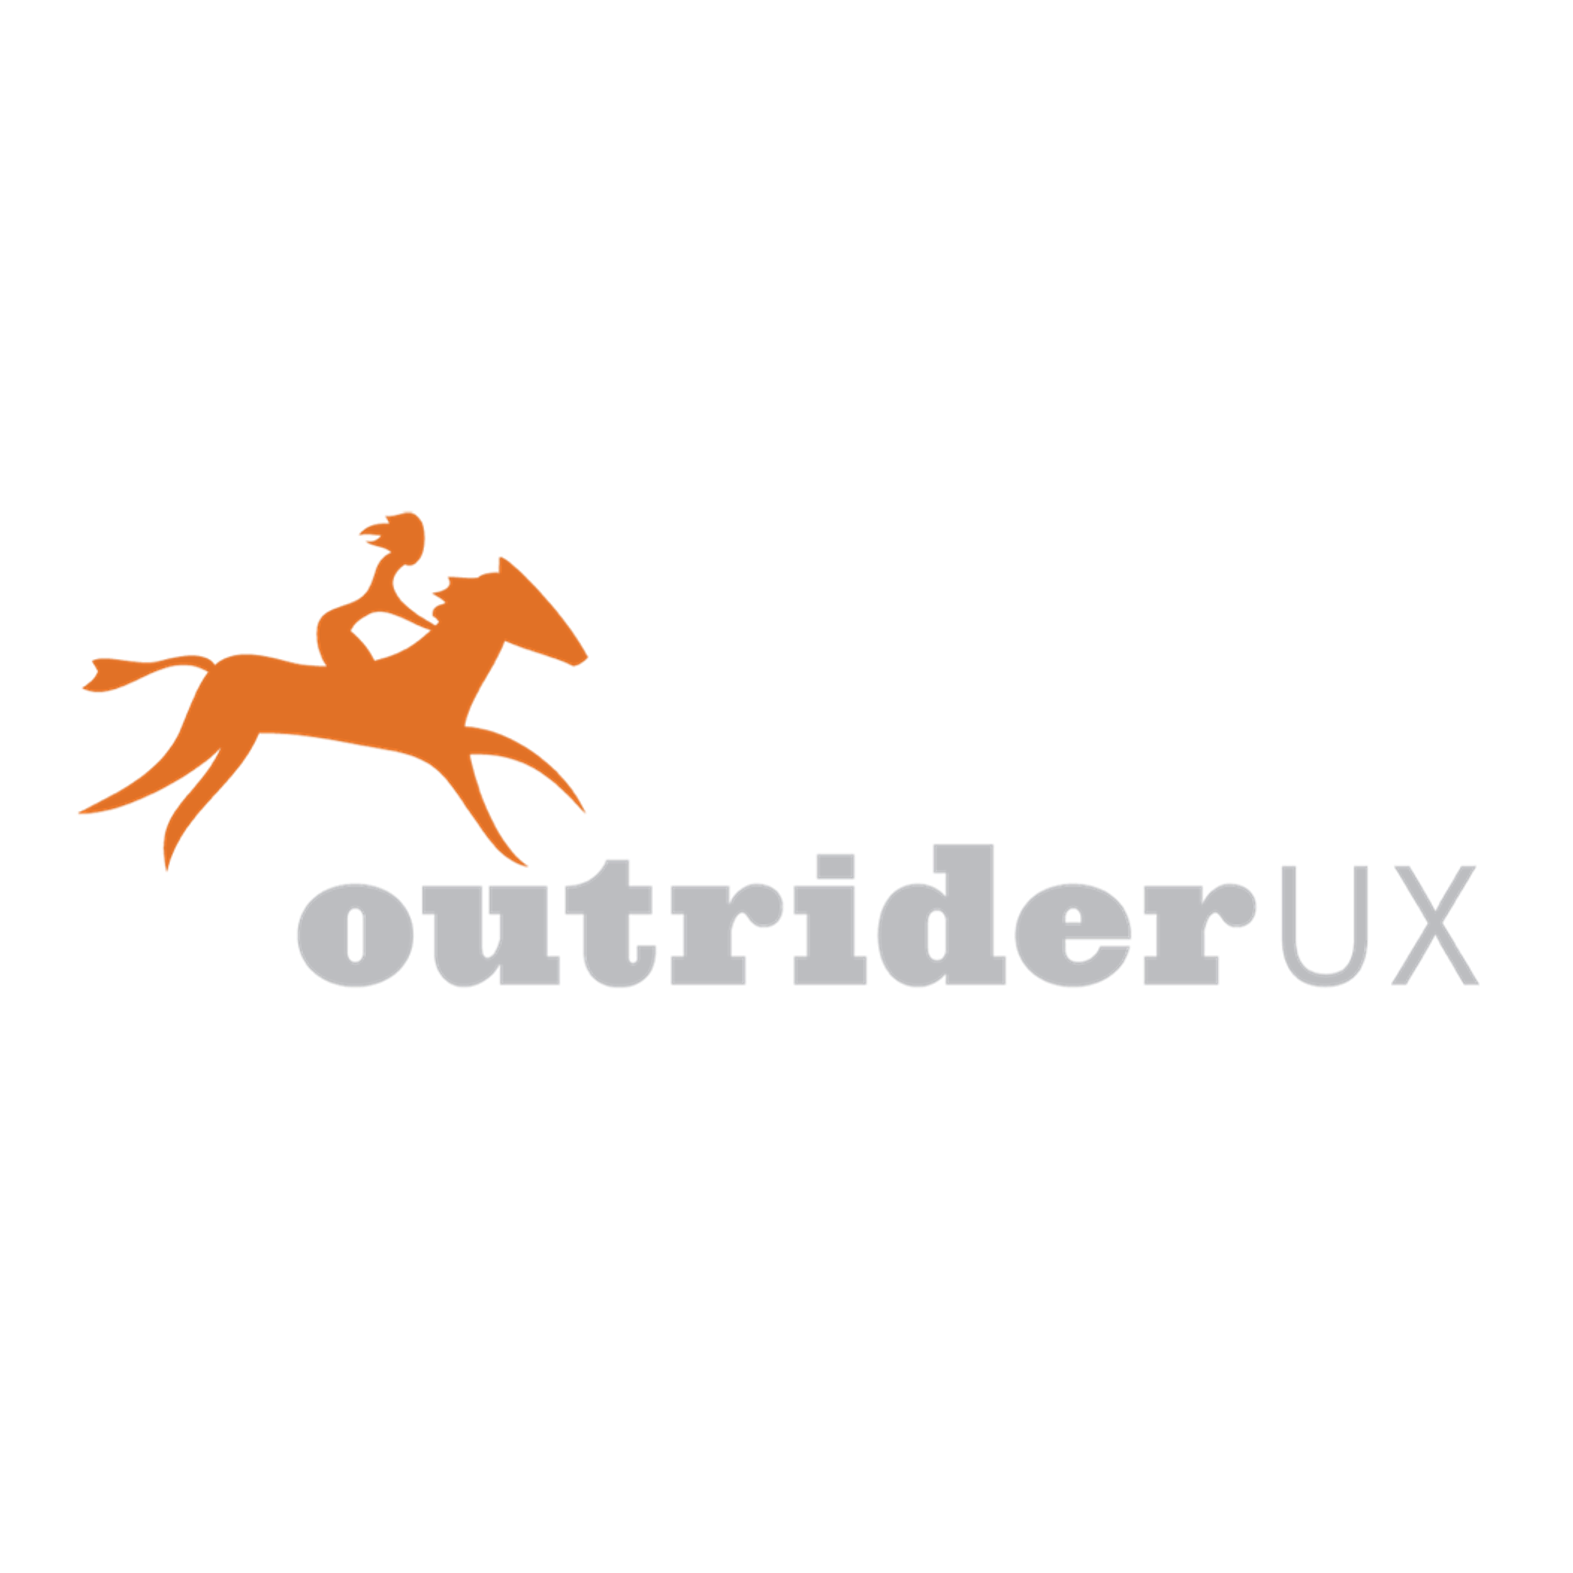 Outrider UX